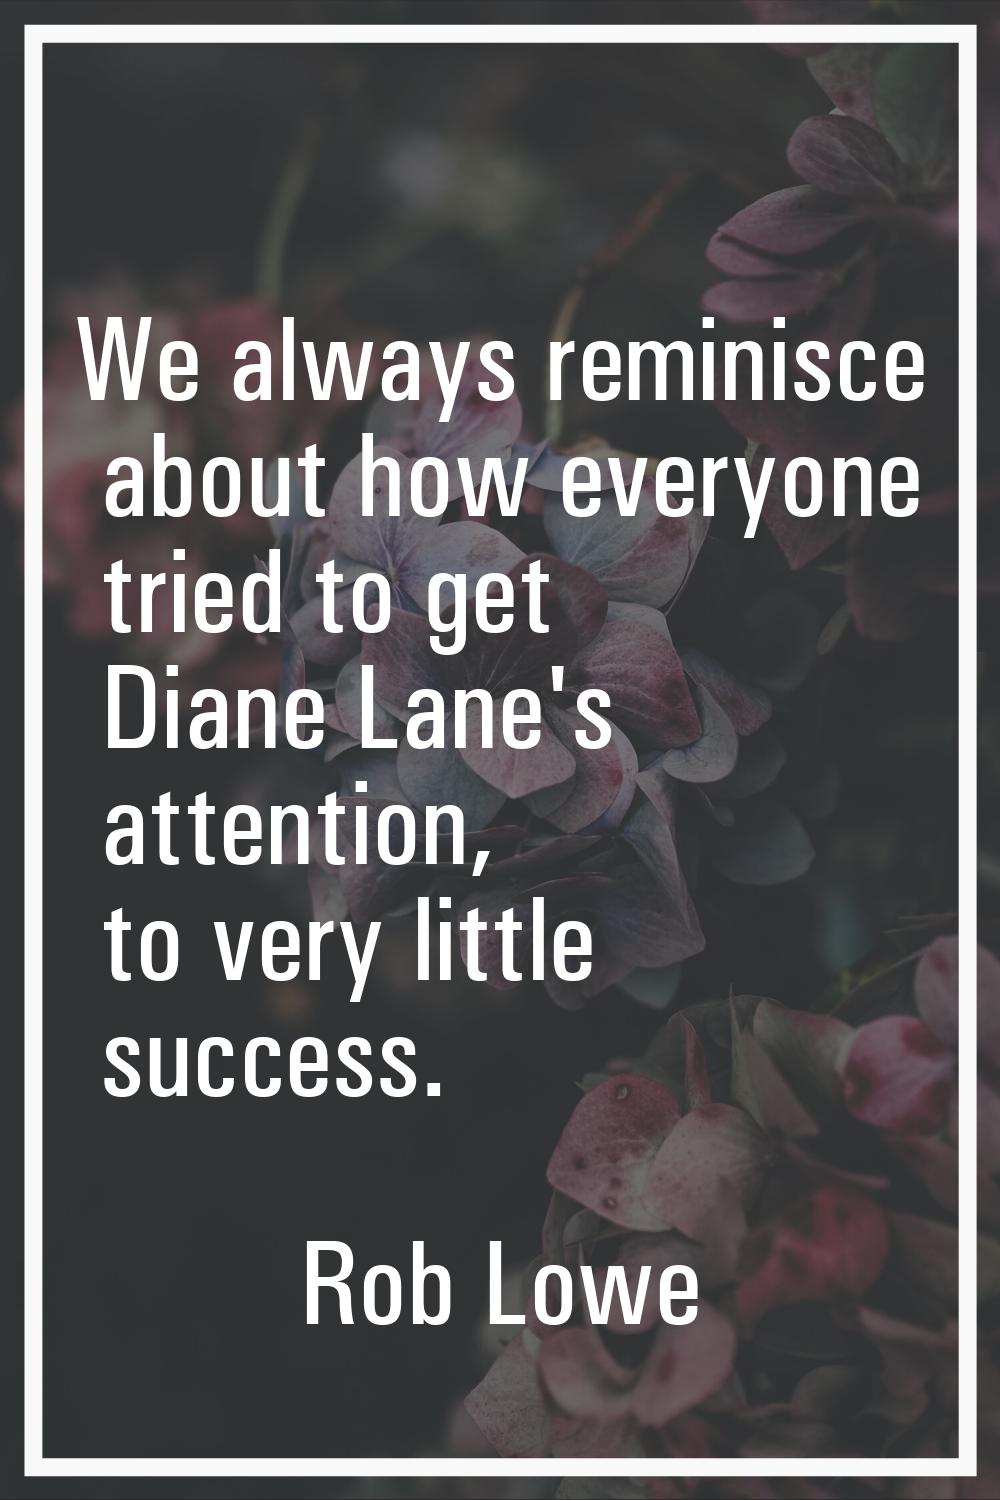 We always reminisce about how everyone tried to get Diane Lane's attention, to very little success.